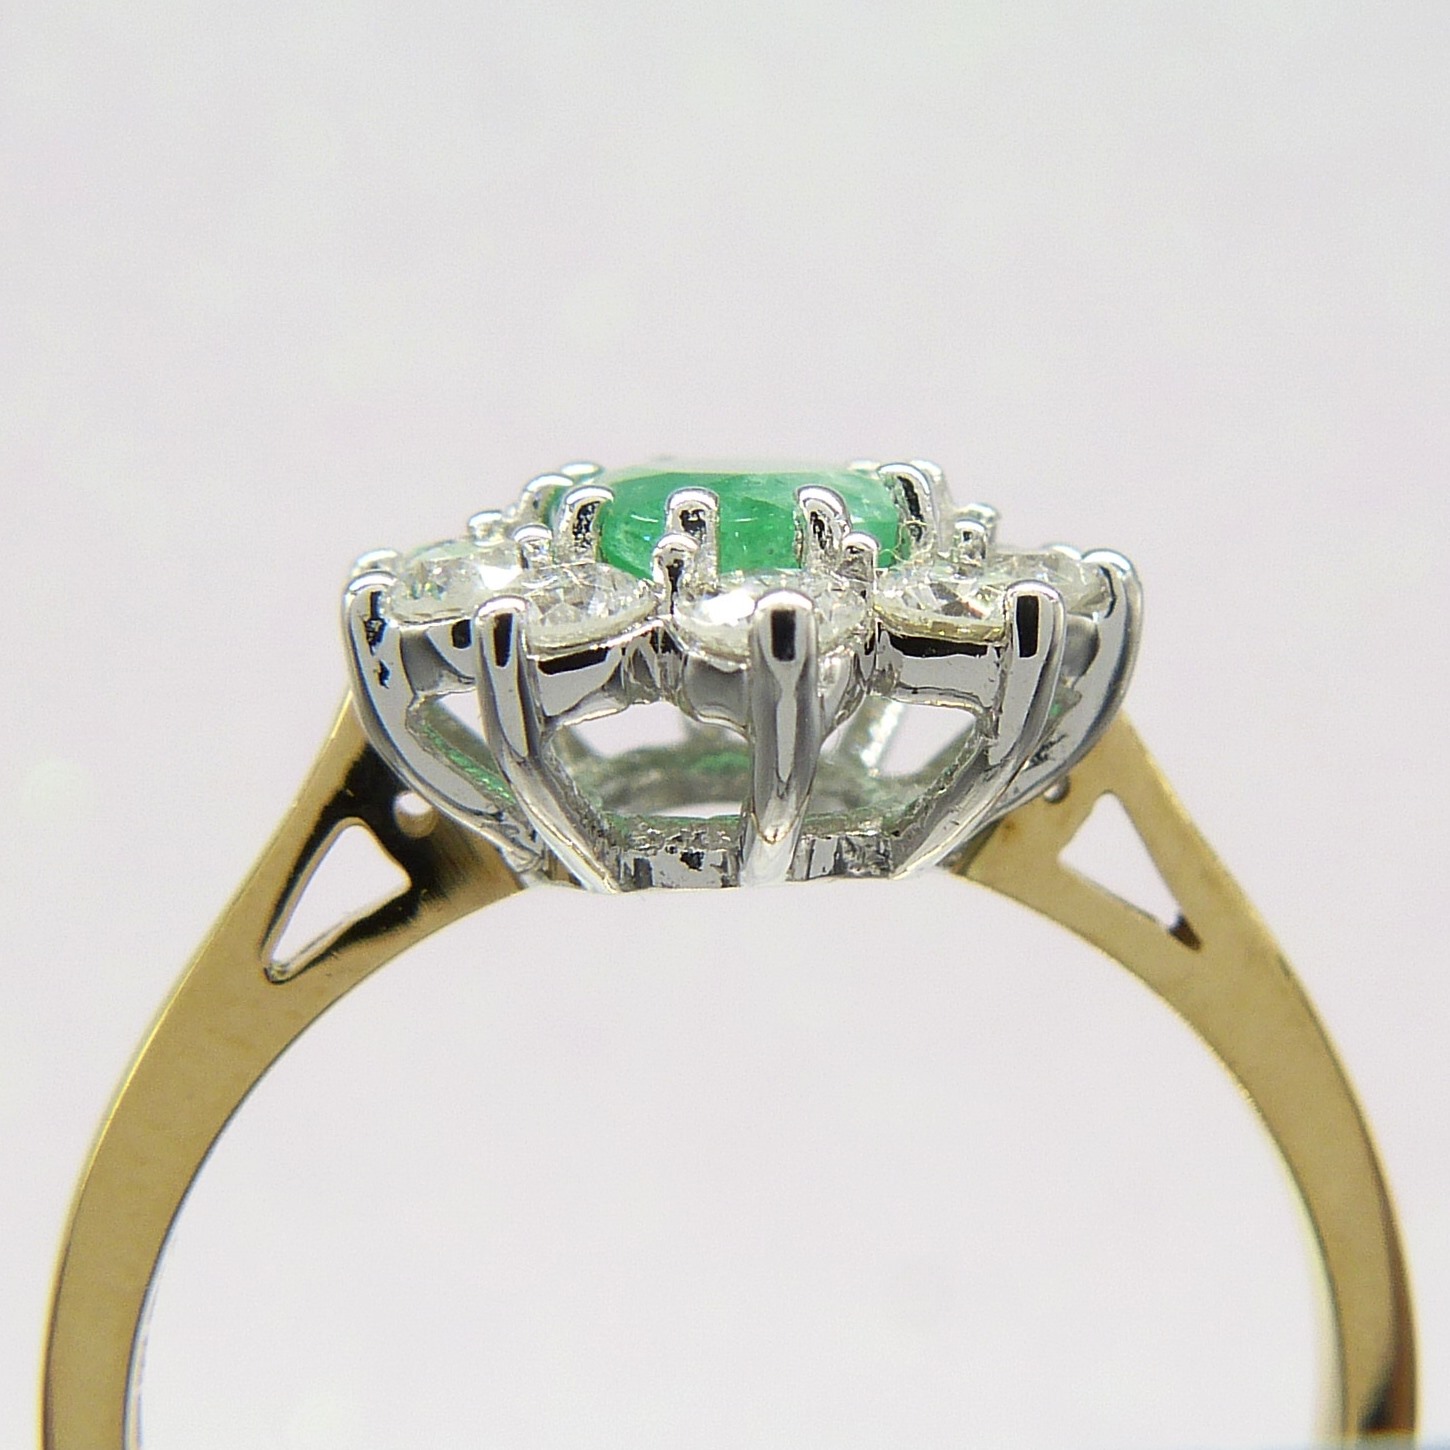 A certificated 18ct yellow Gold oval Emerald gemstone and round brilliant-cut Diamond ring - Image 5 of 10